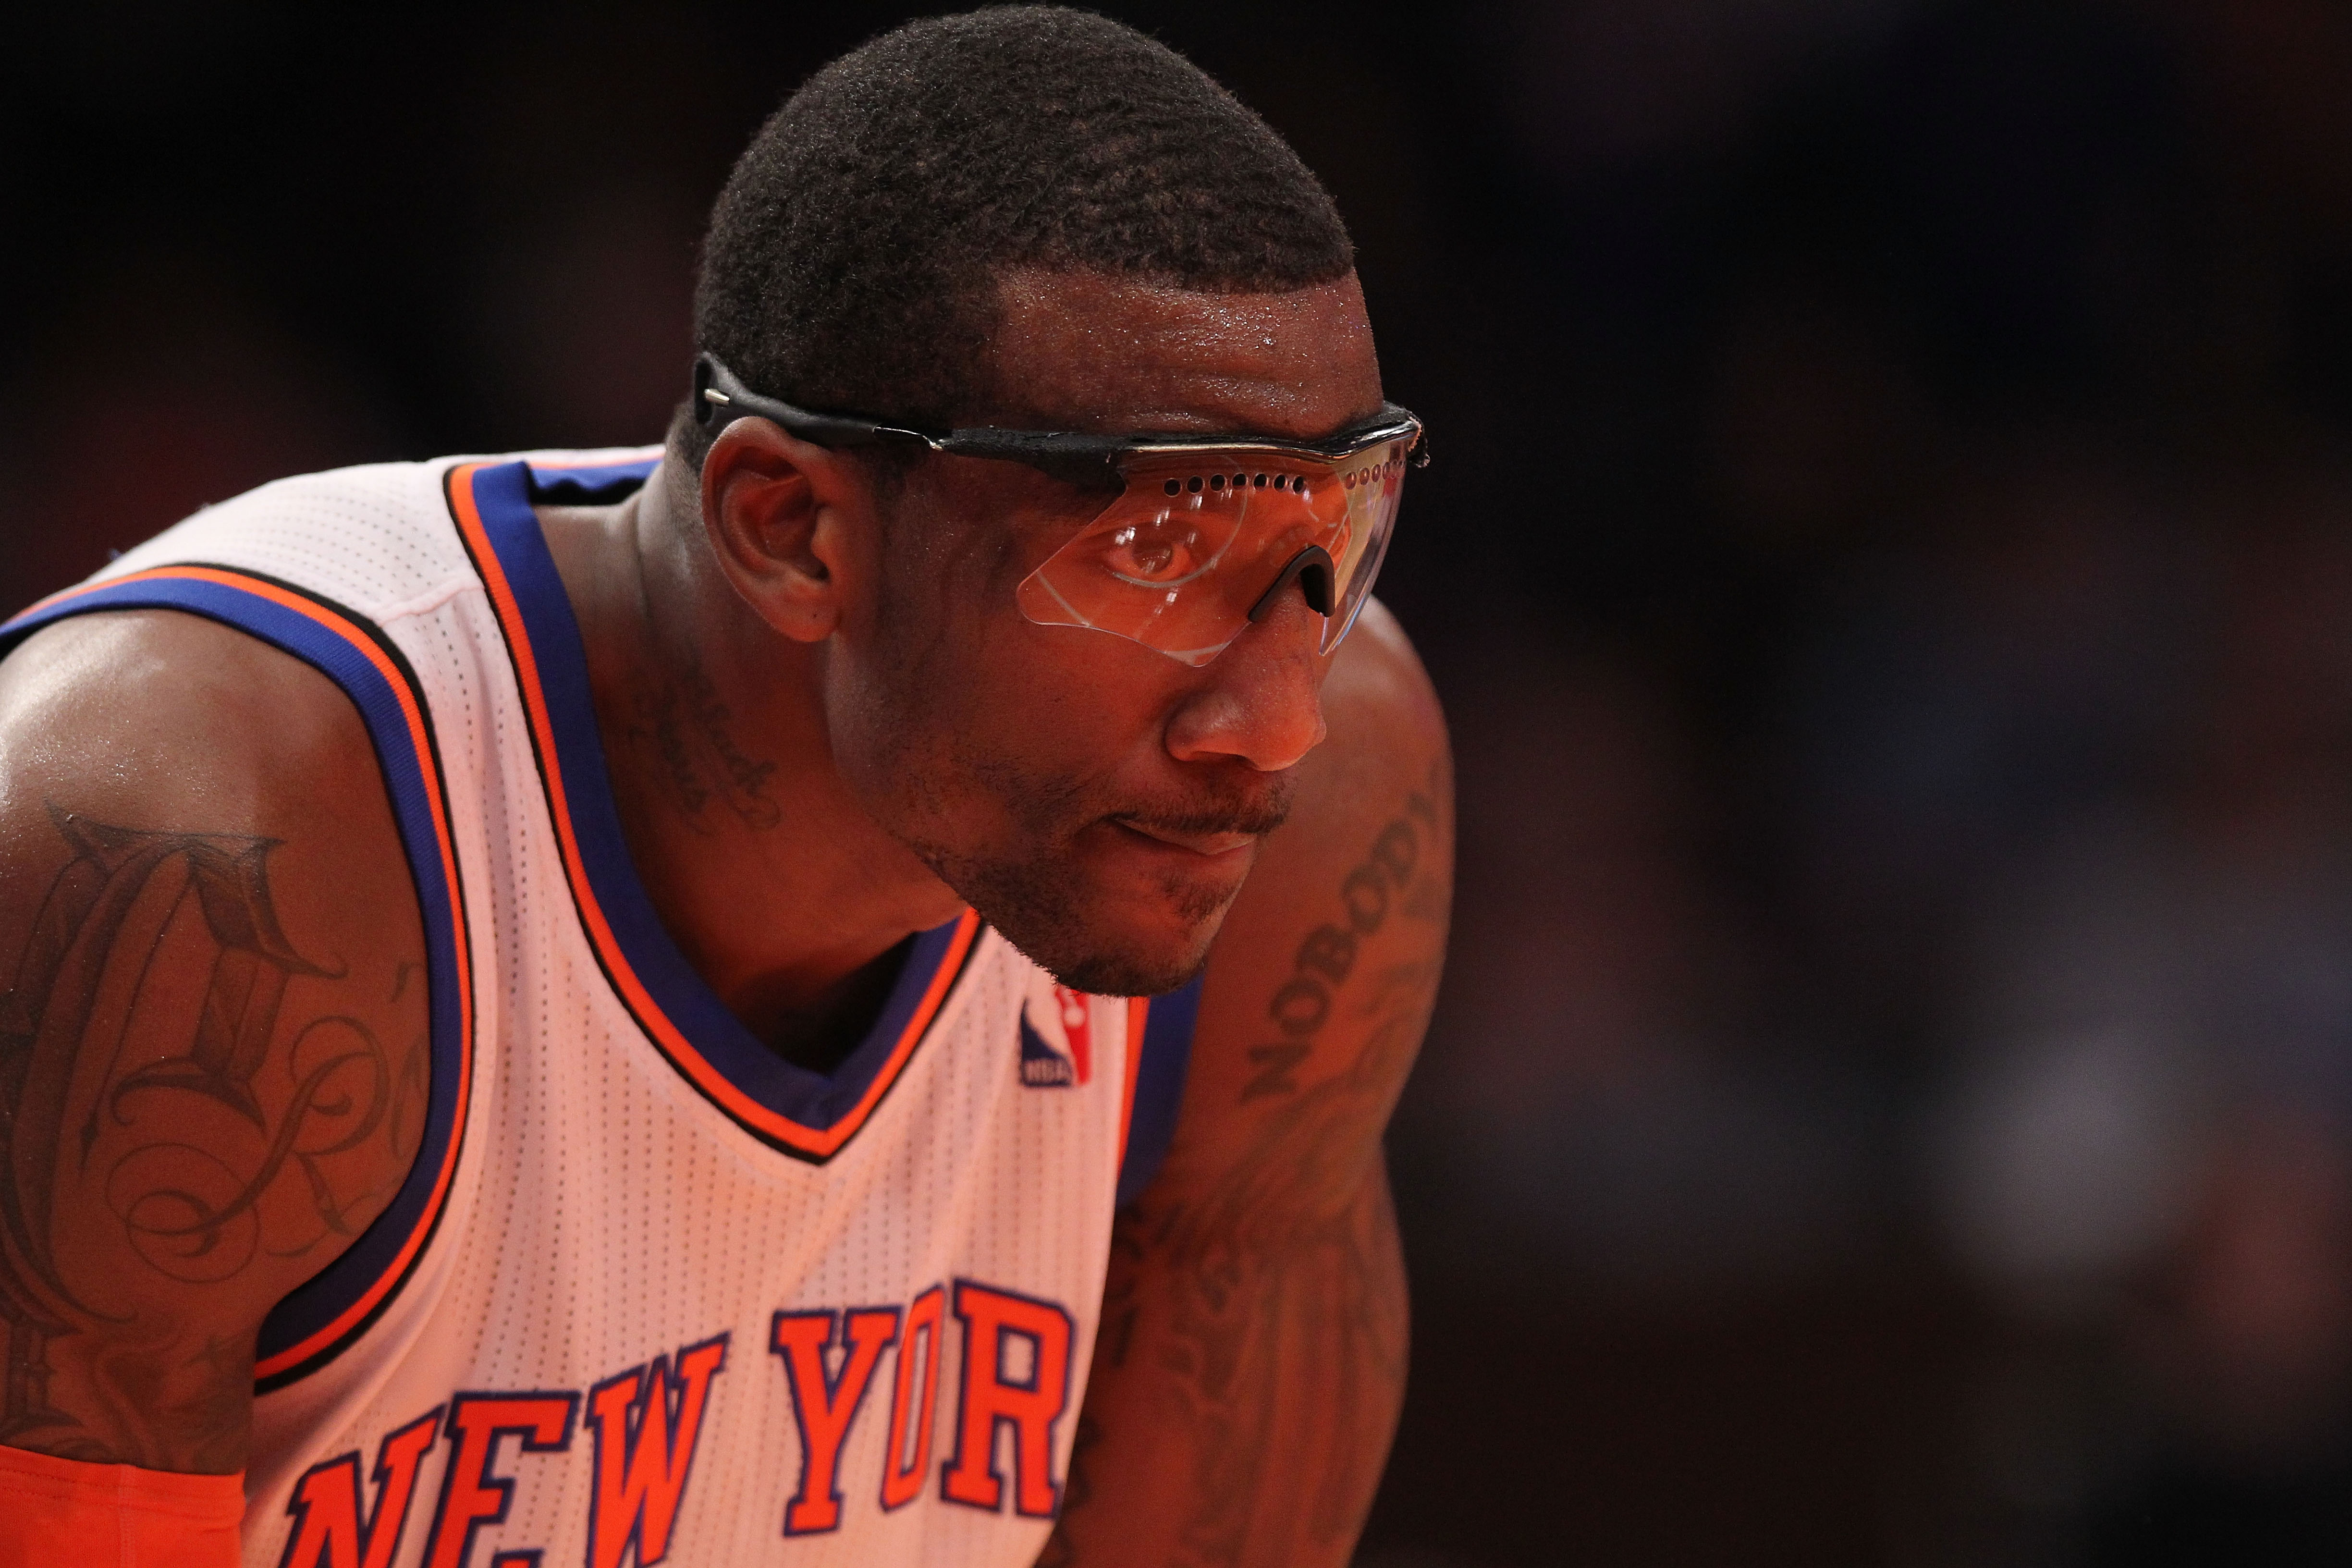 NEW YORK - OCTOBER 30:  Amar'e Stoudemire #1 of the New York Knicks watches a foul shot against the Portland Trail Blazers at Madison Square Garden on October 30, 2010 in New York City. NOTE TO USER: User expressly acknowledges and agrees that, by downloa